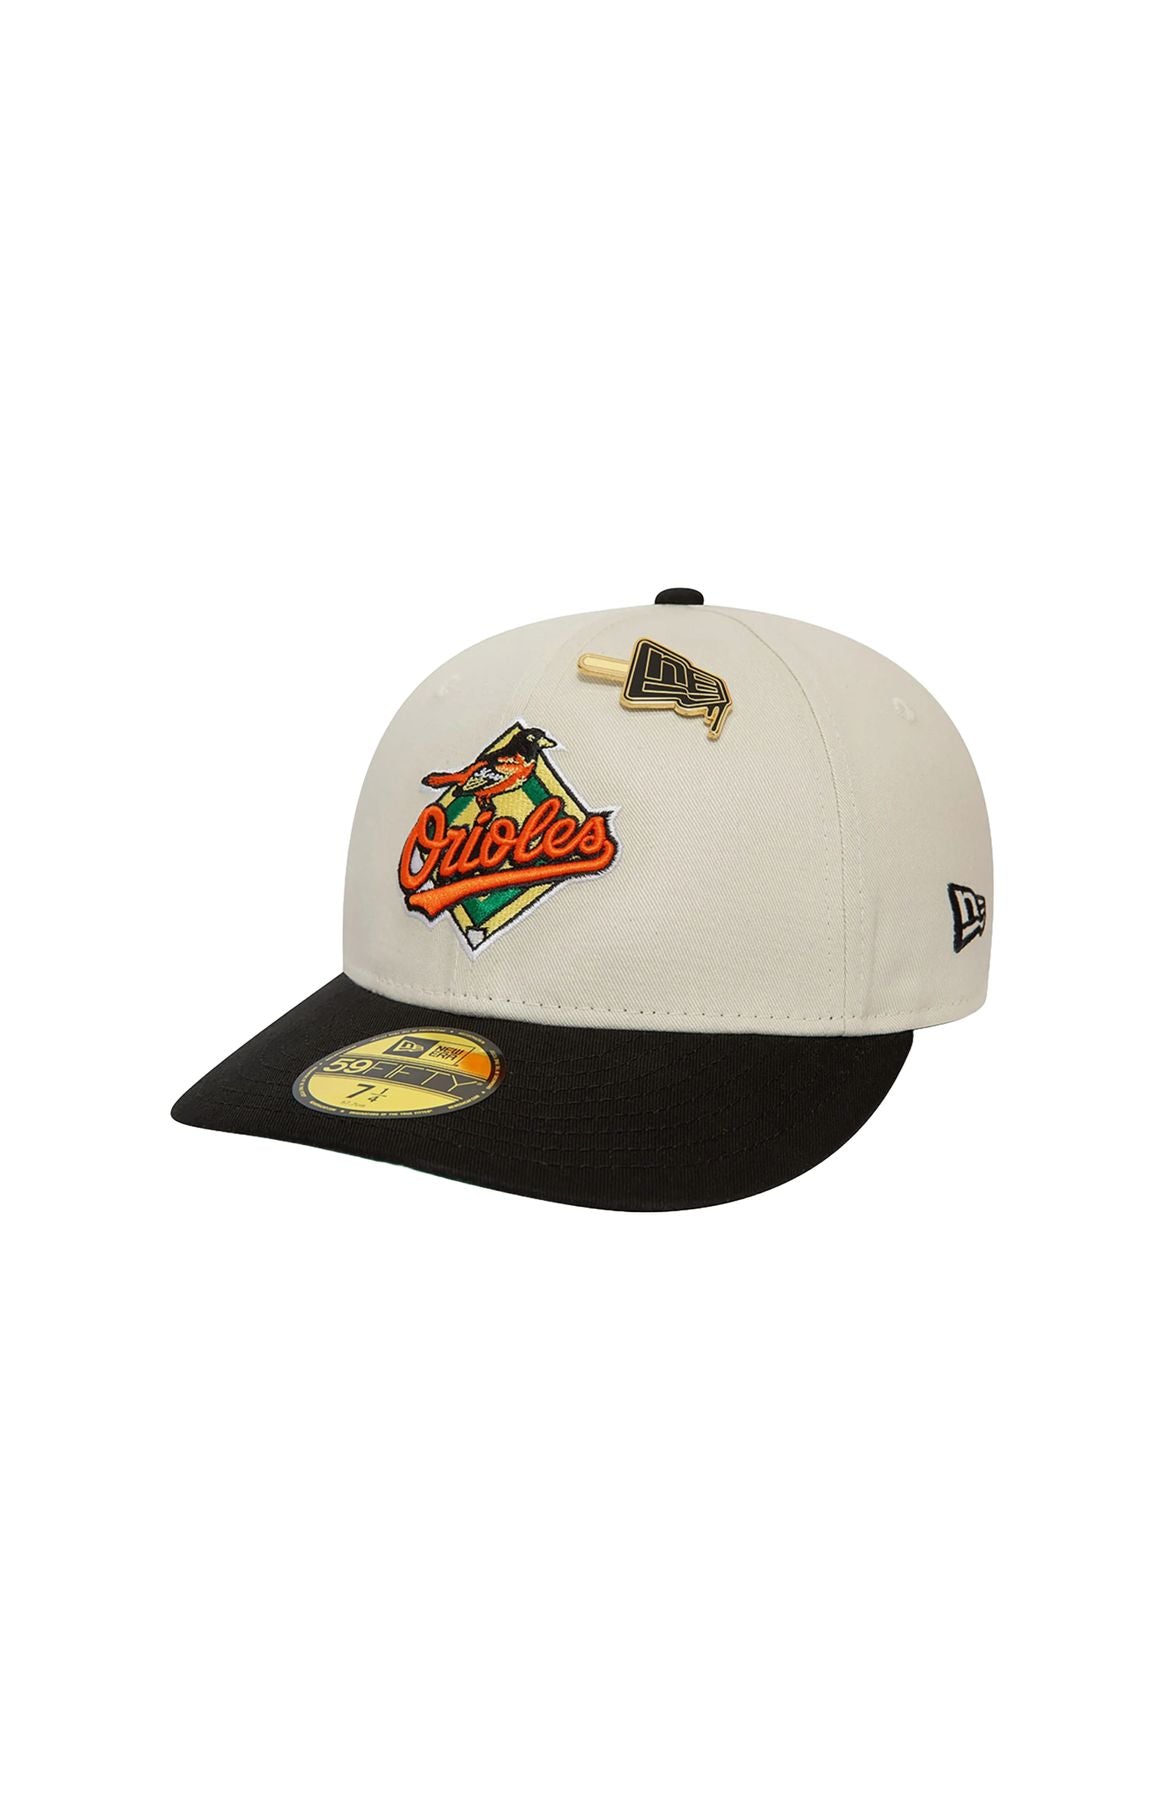 59 FIFTY ORIOLES -  -